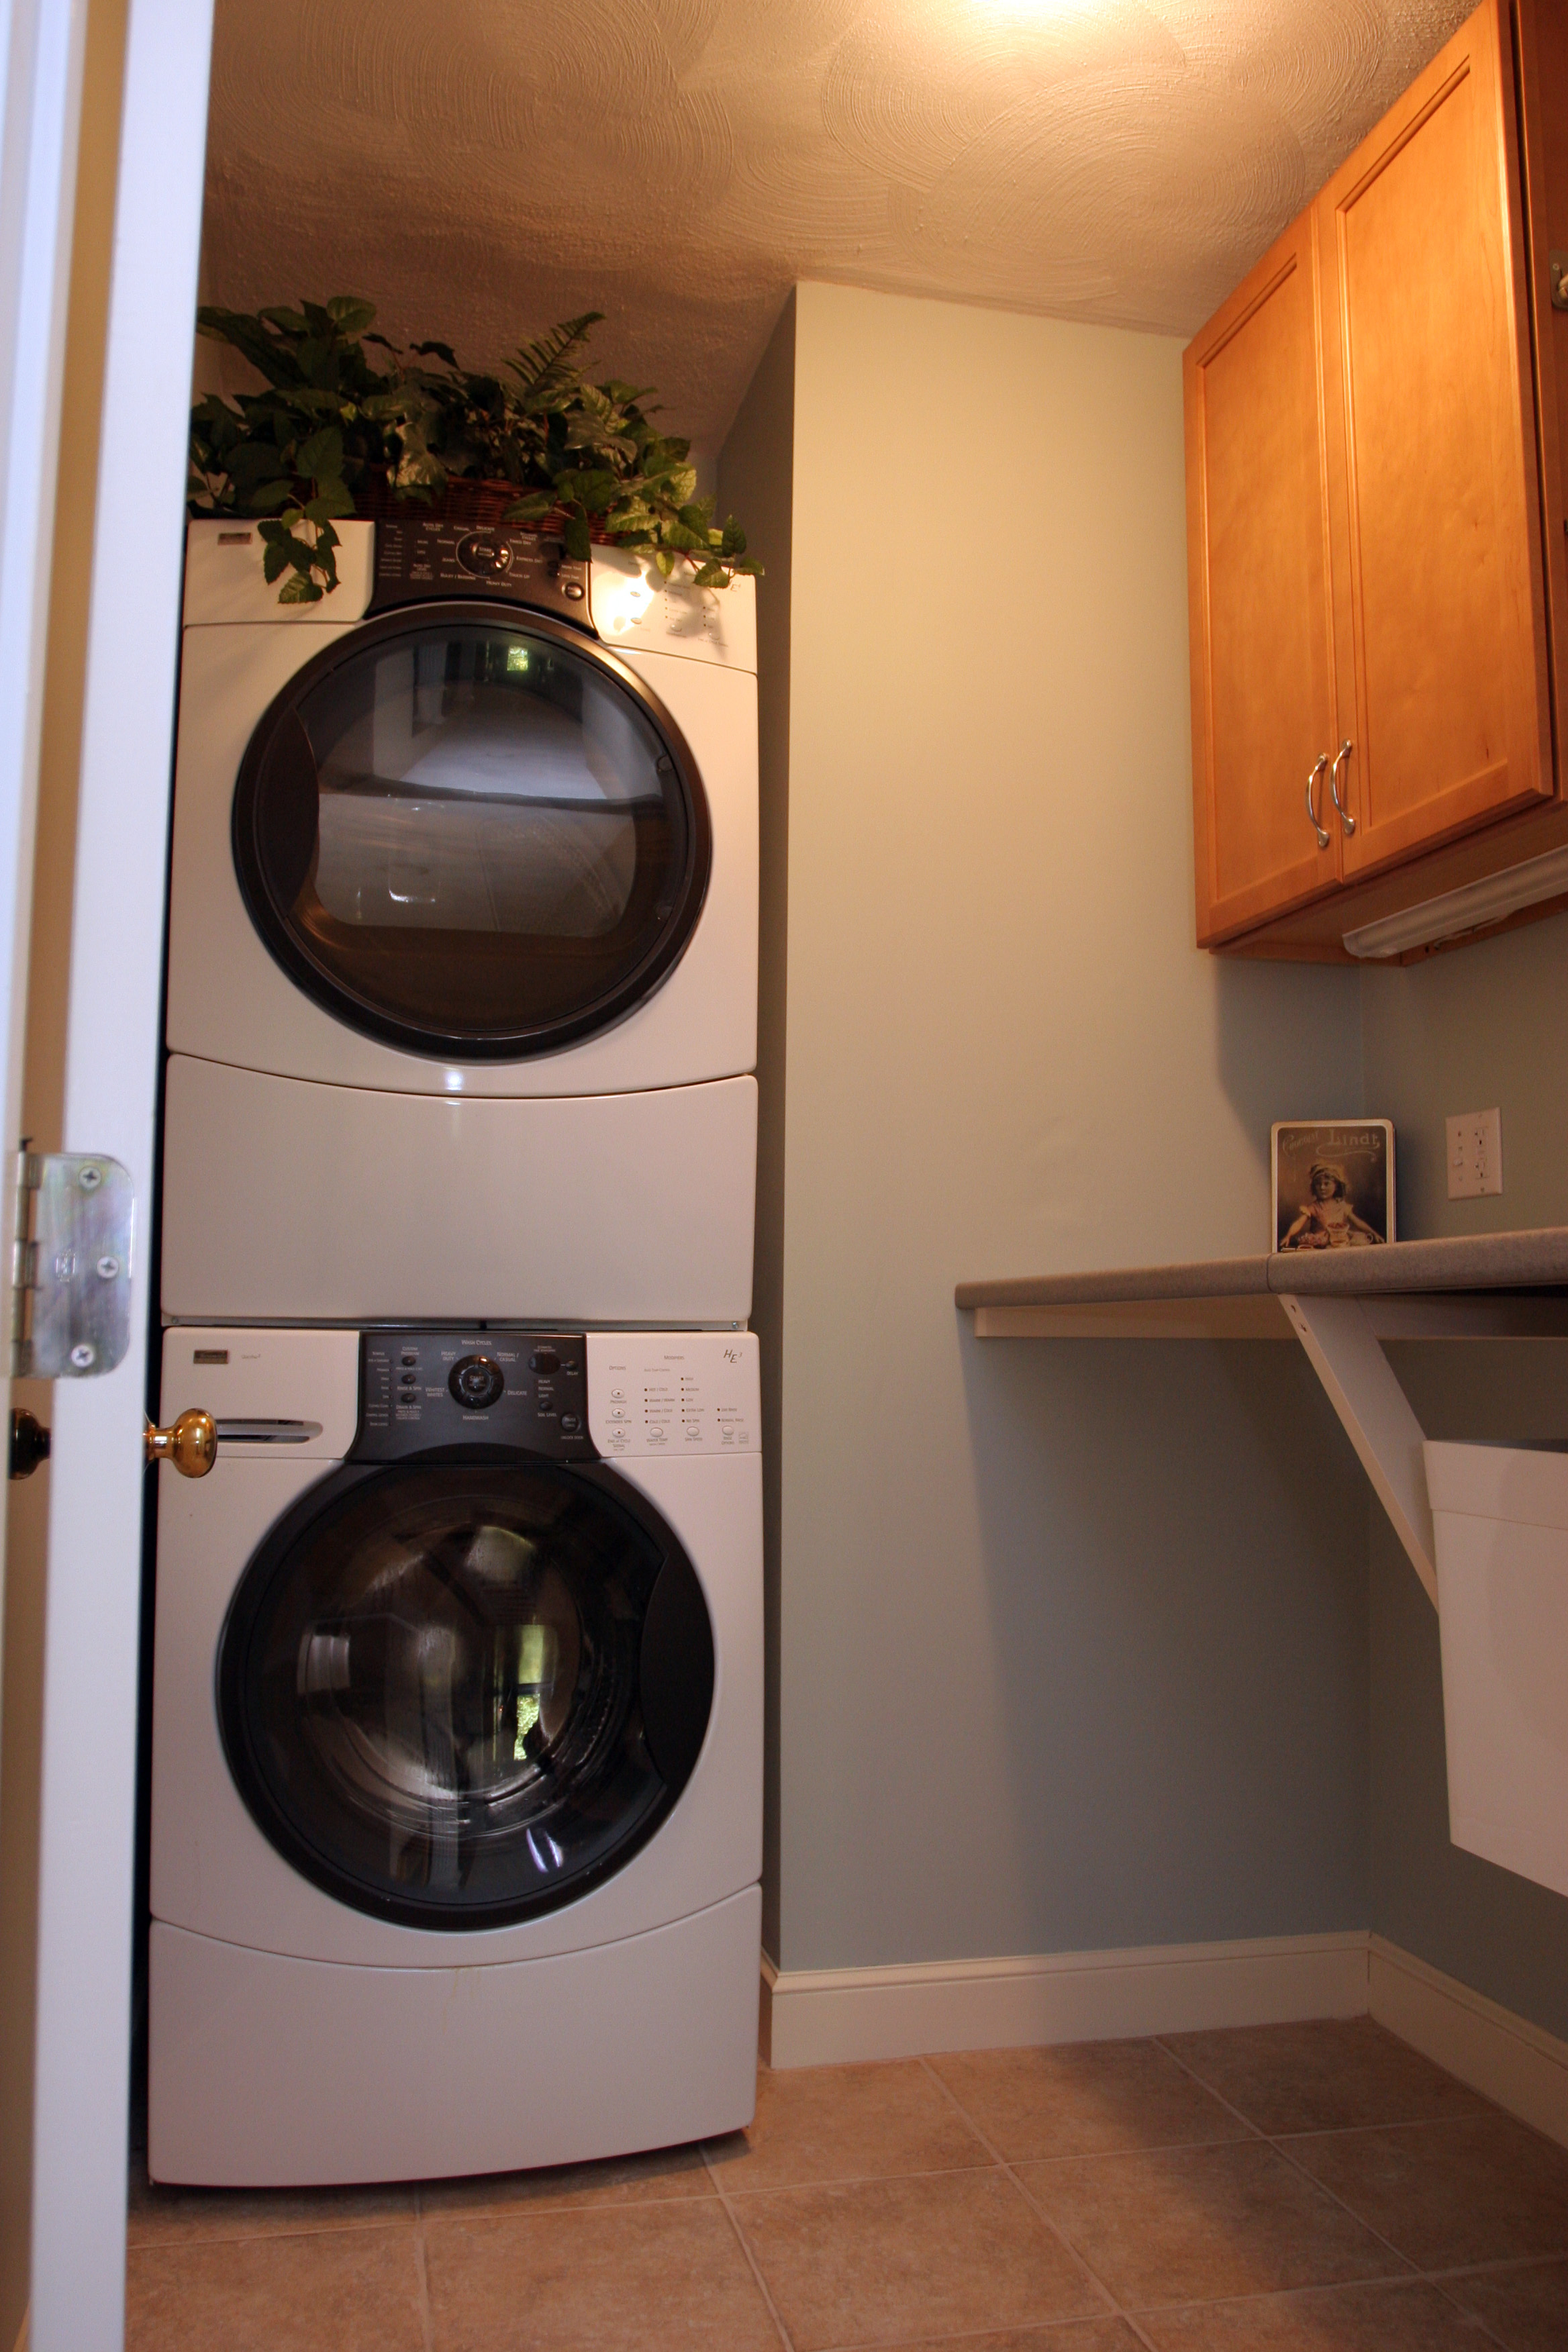 AFTER: A COMPACT LAUNDRY ROOM: FORM & FUNCTION